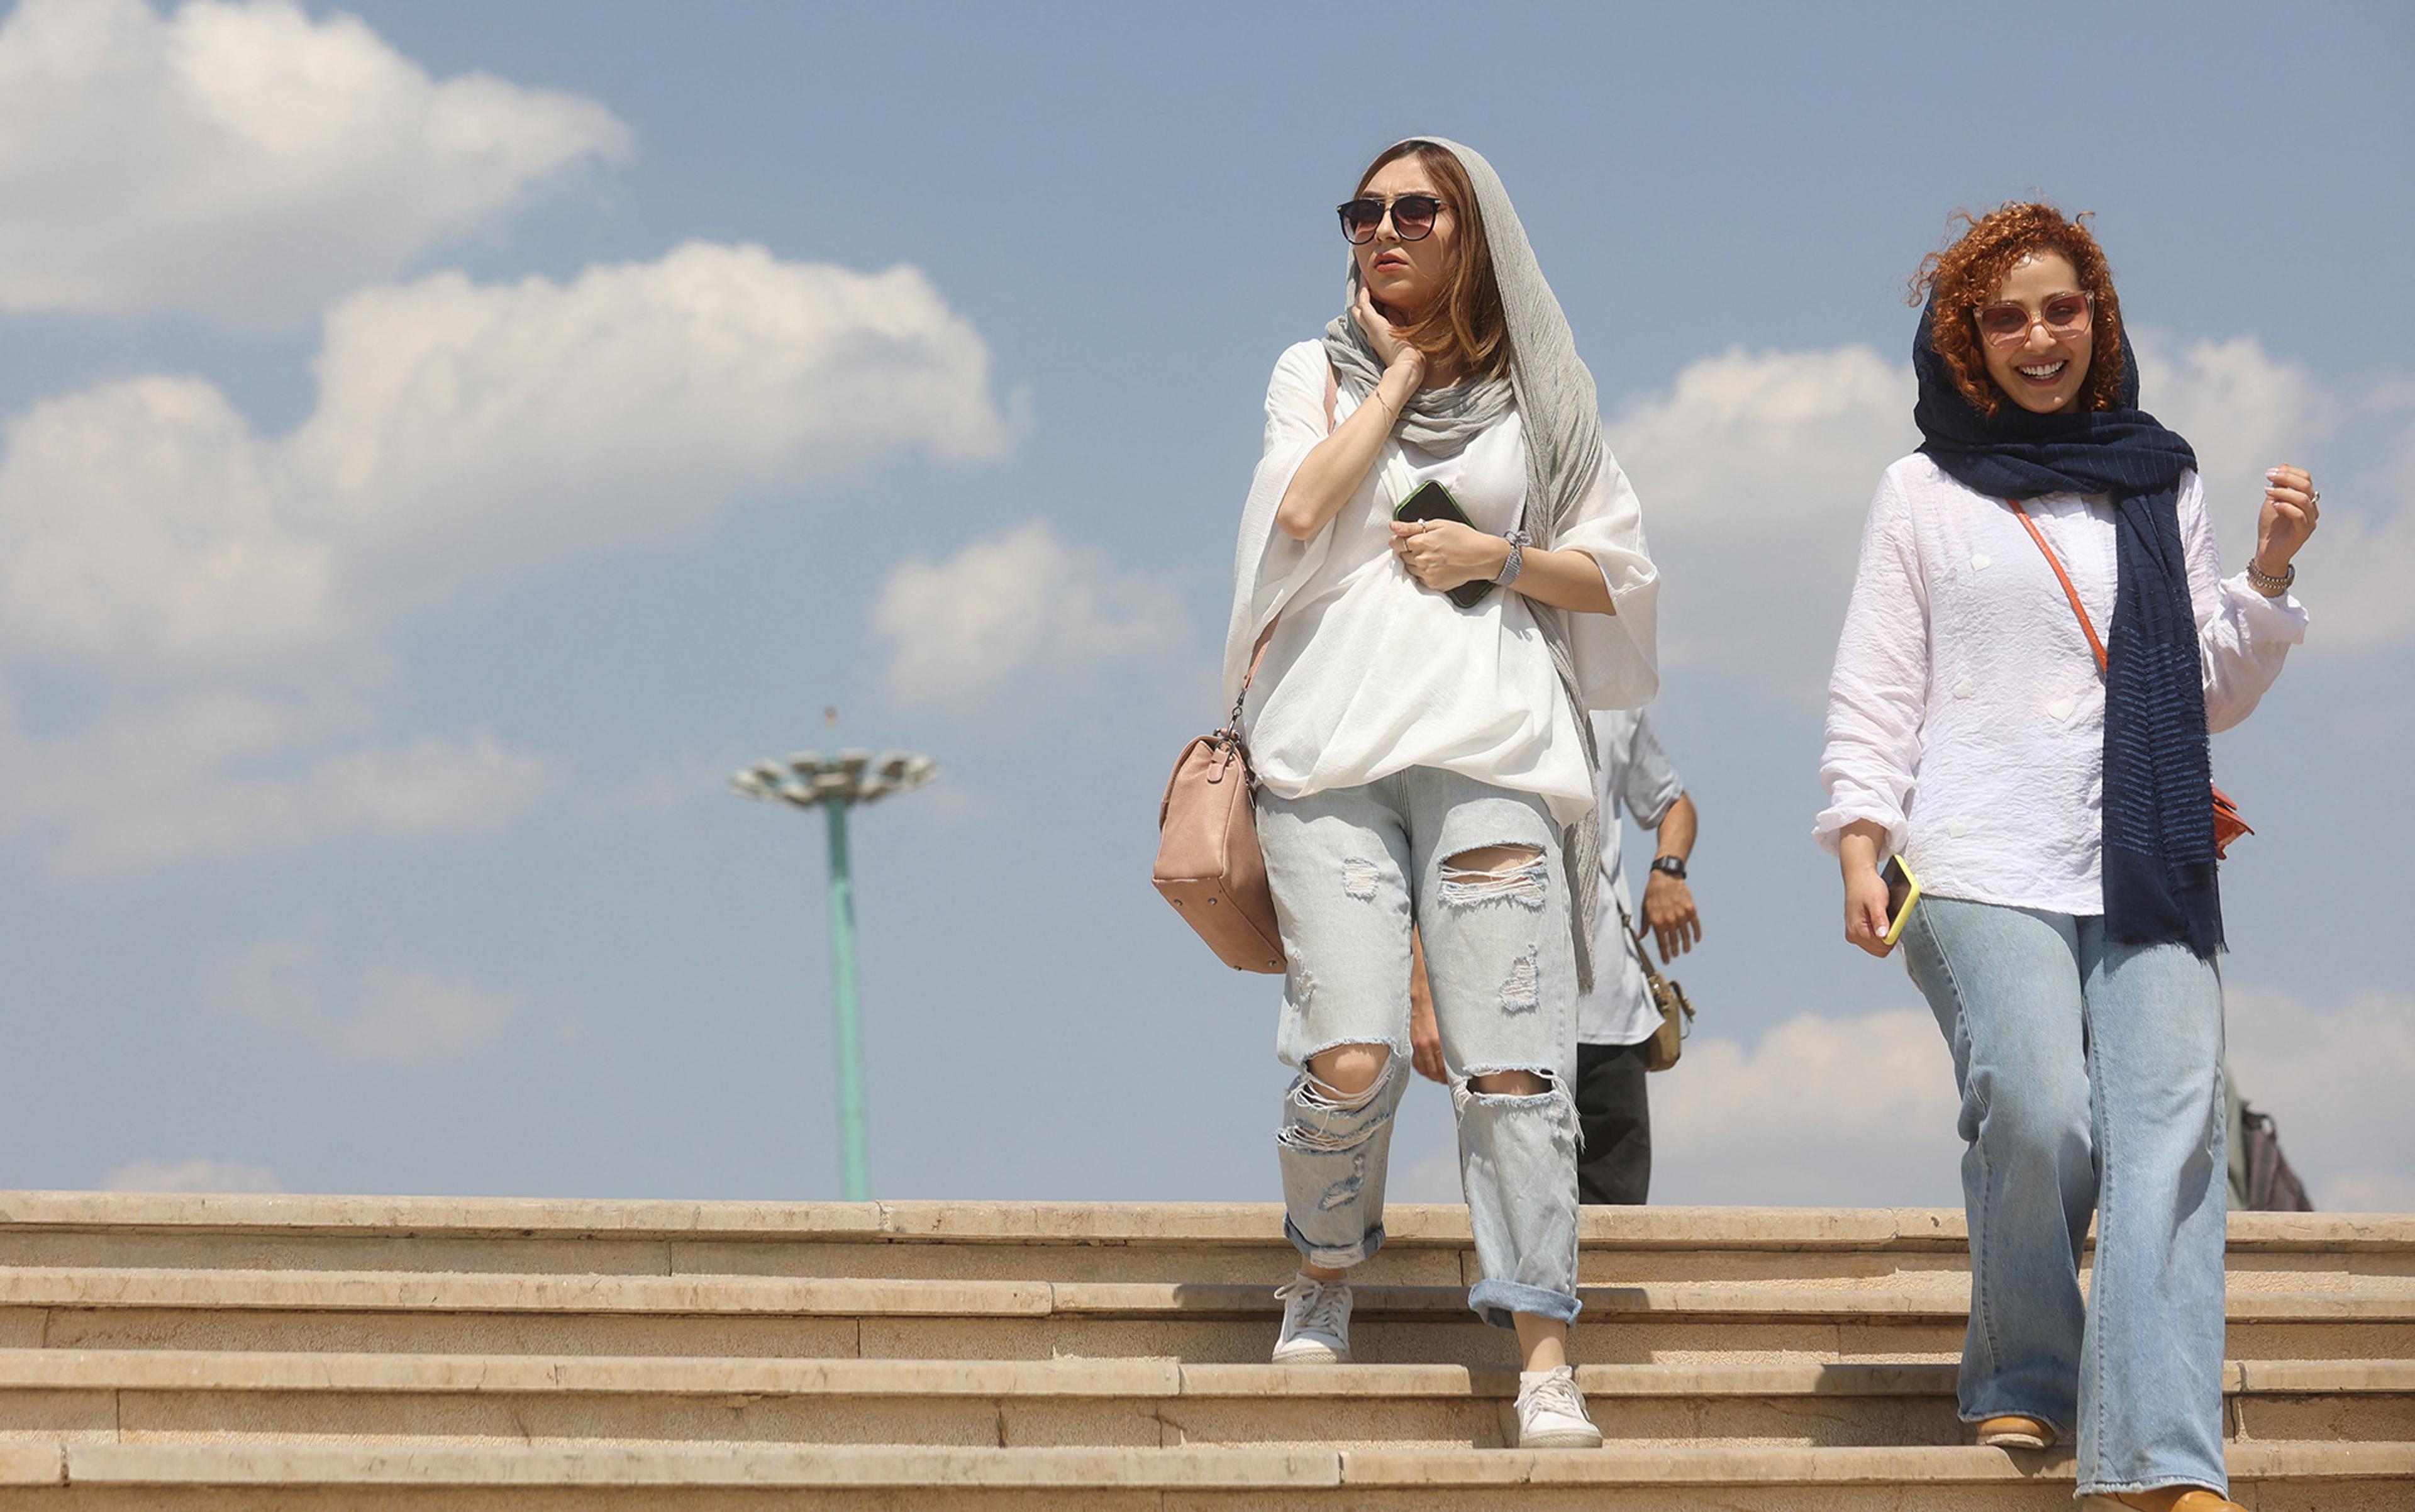 Two fashionably dressed women in modern style hijabs descend steps beneath a blue sky